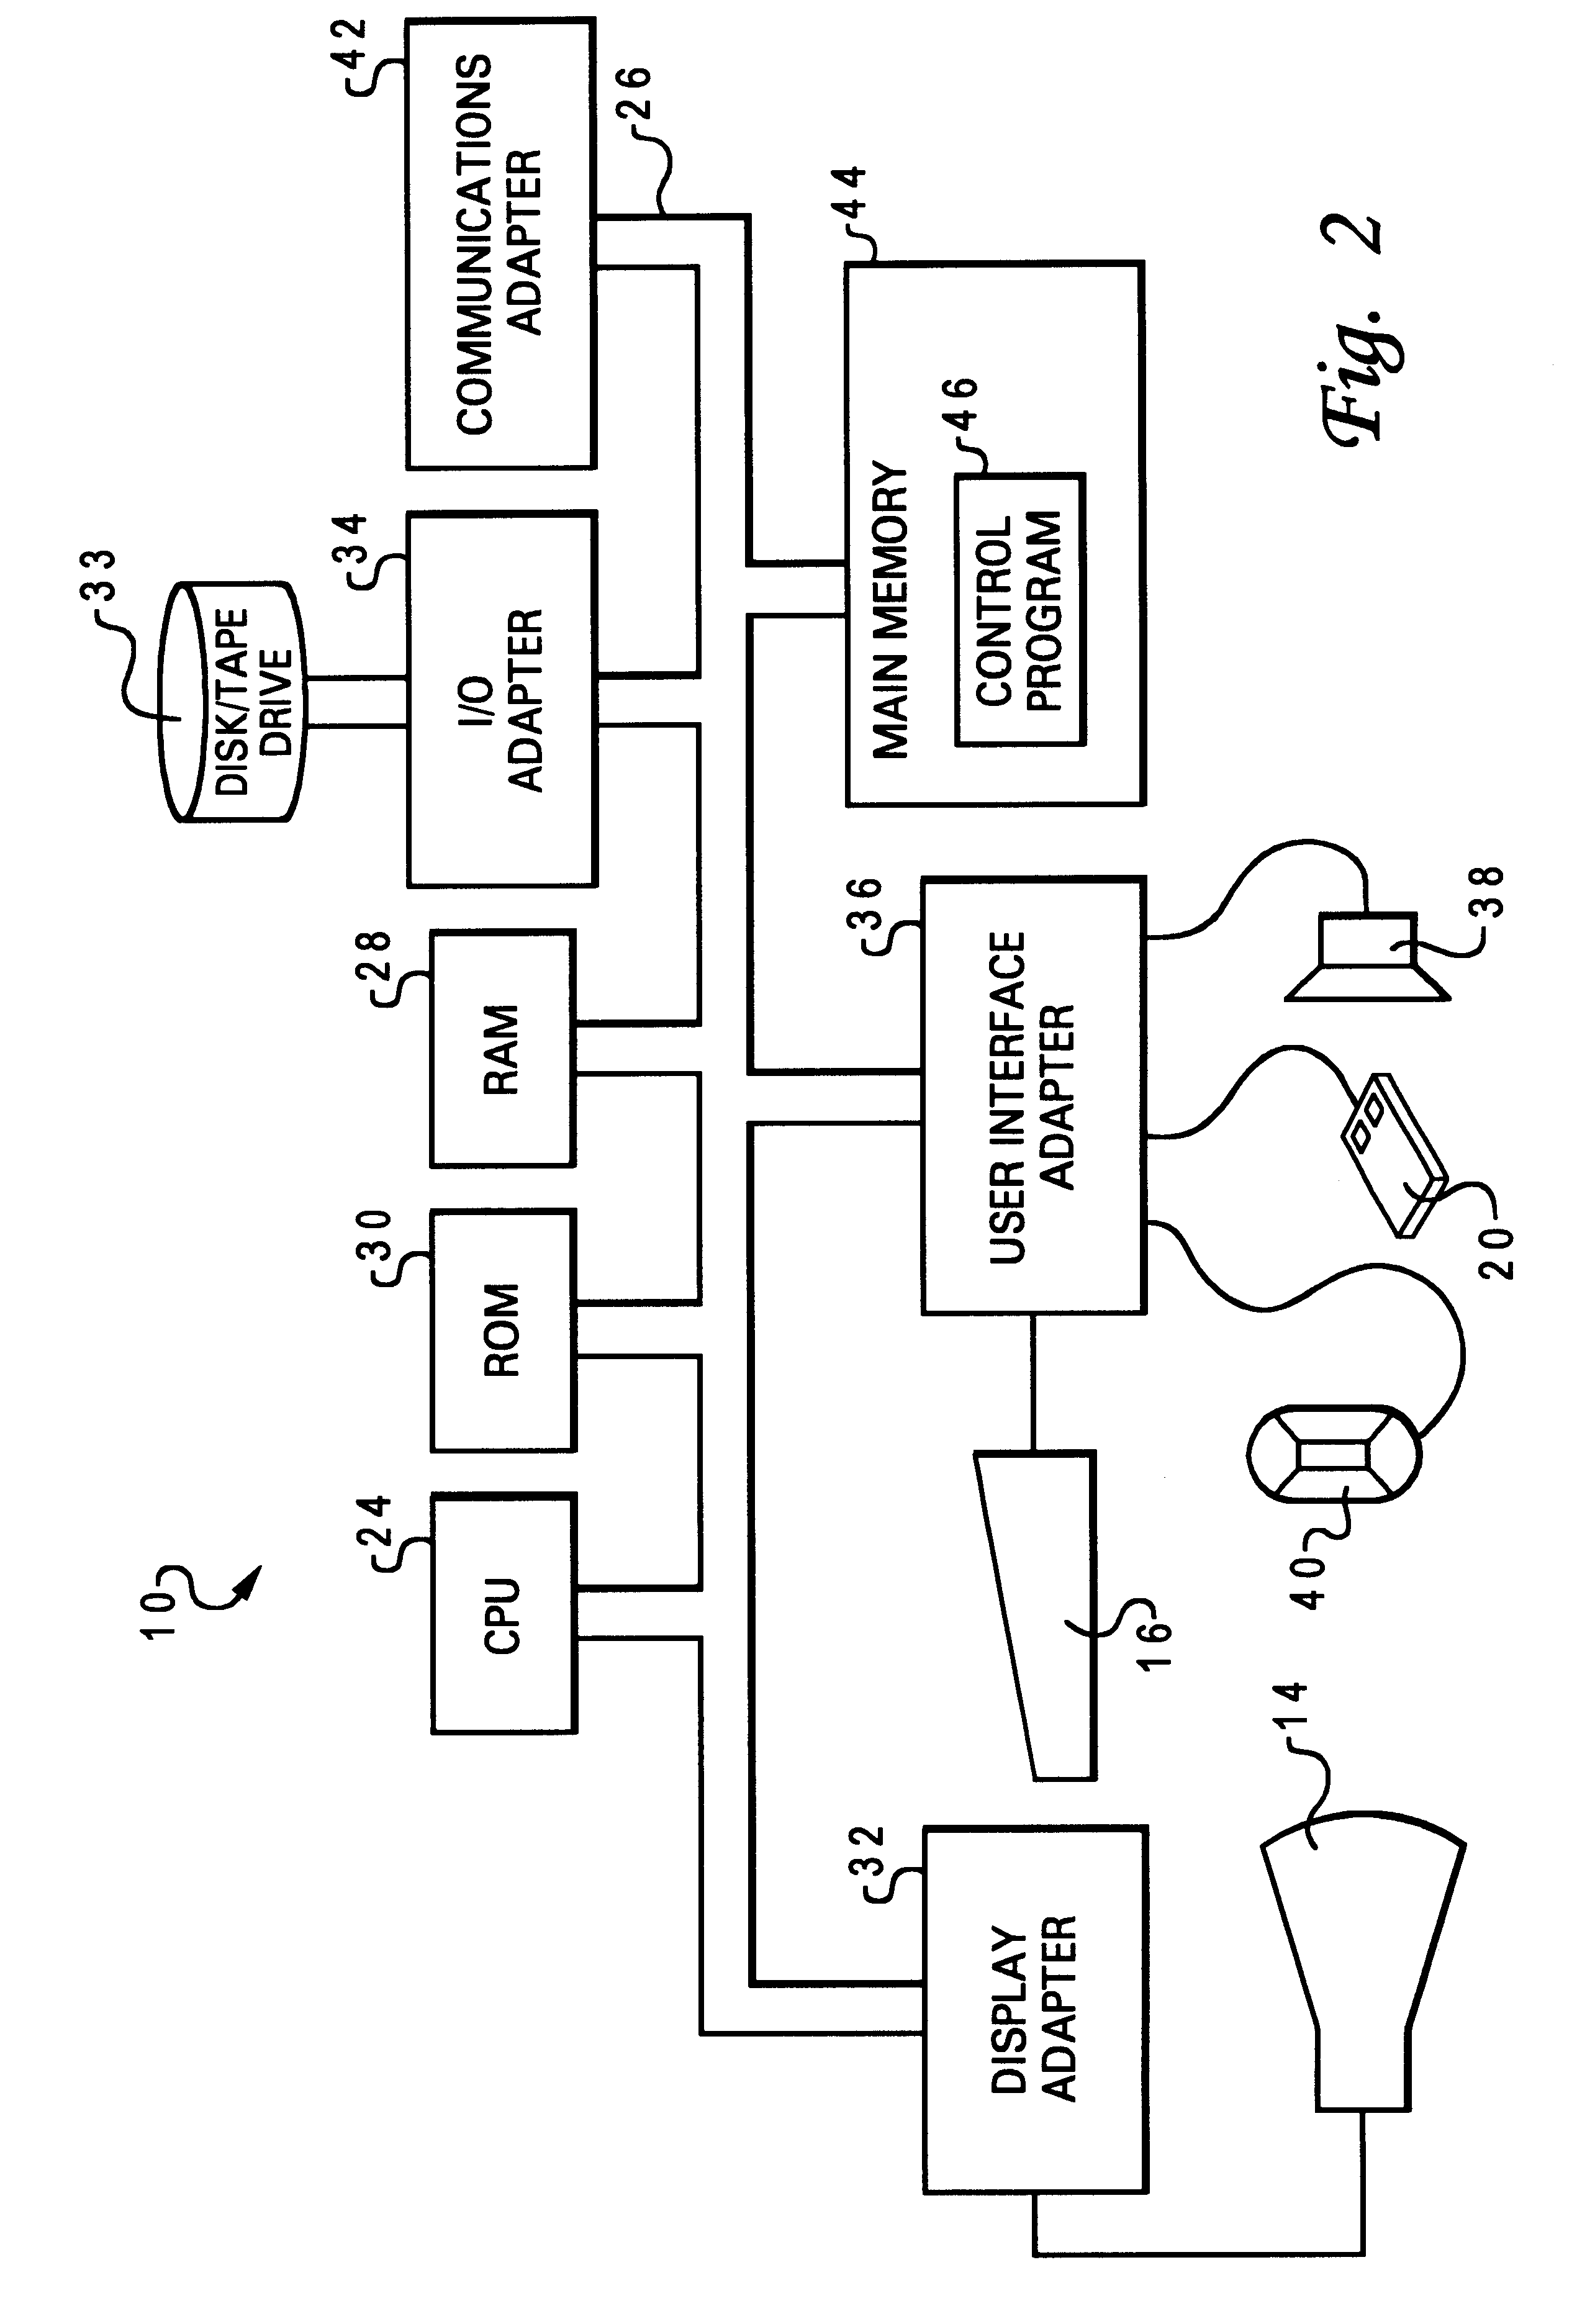 Method and system for incrementally compiling instrumentation into a simulation model